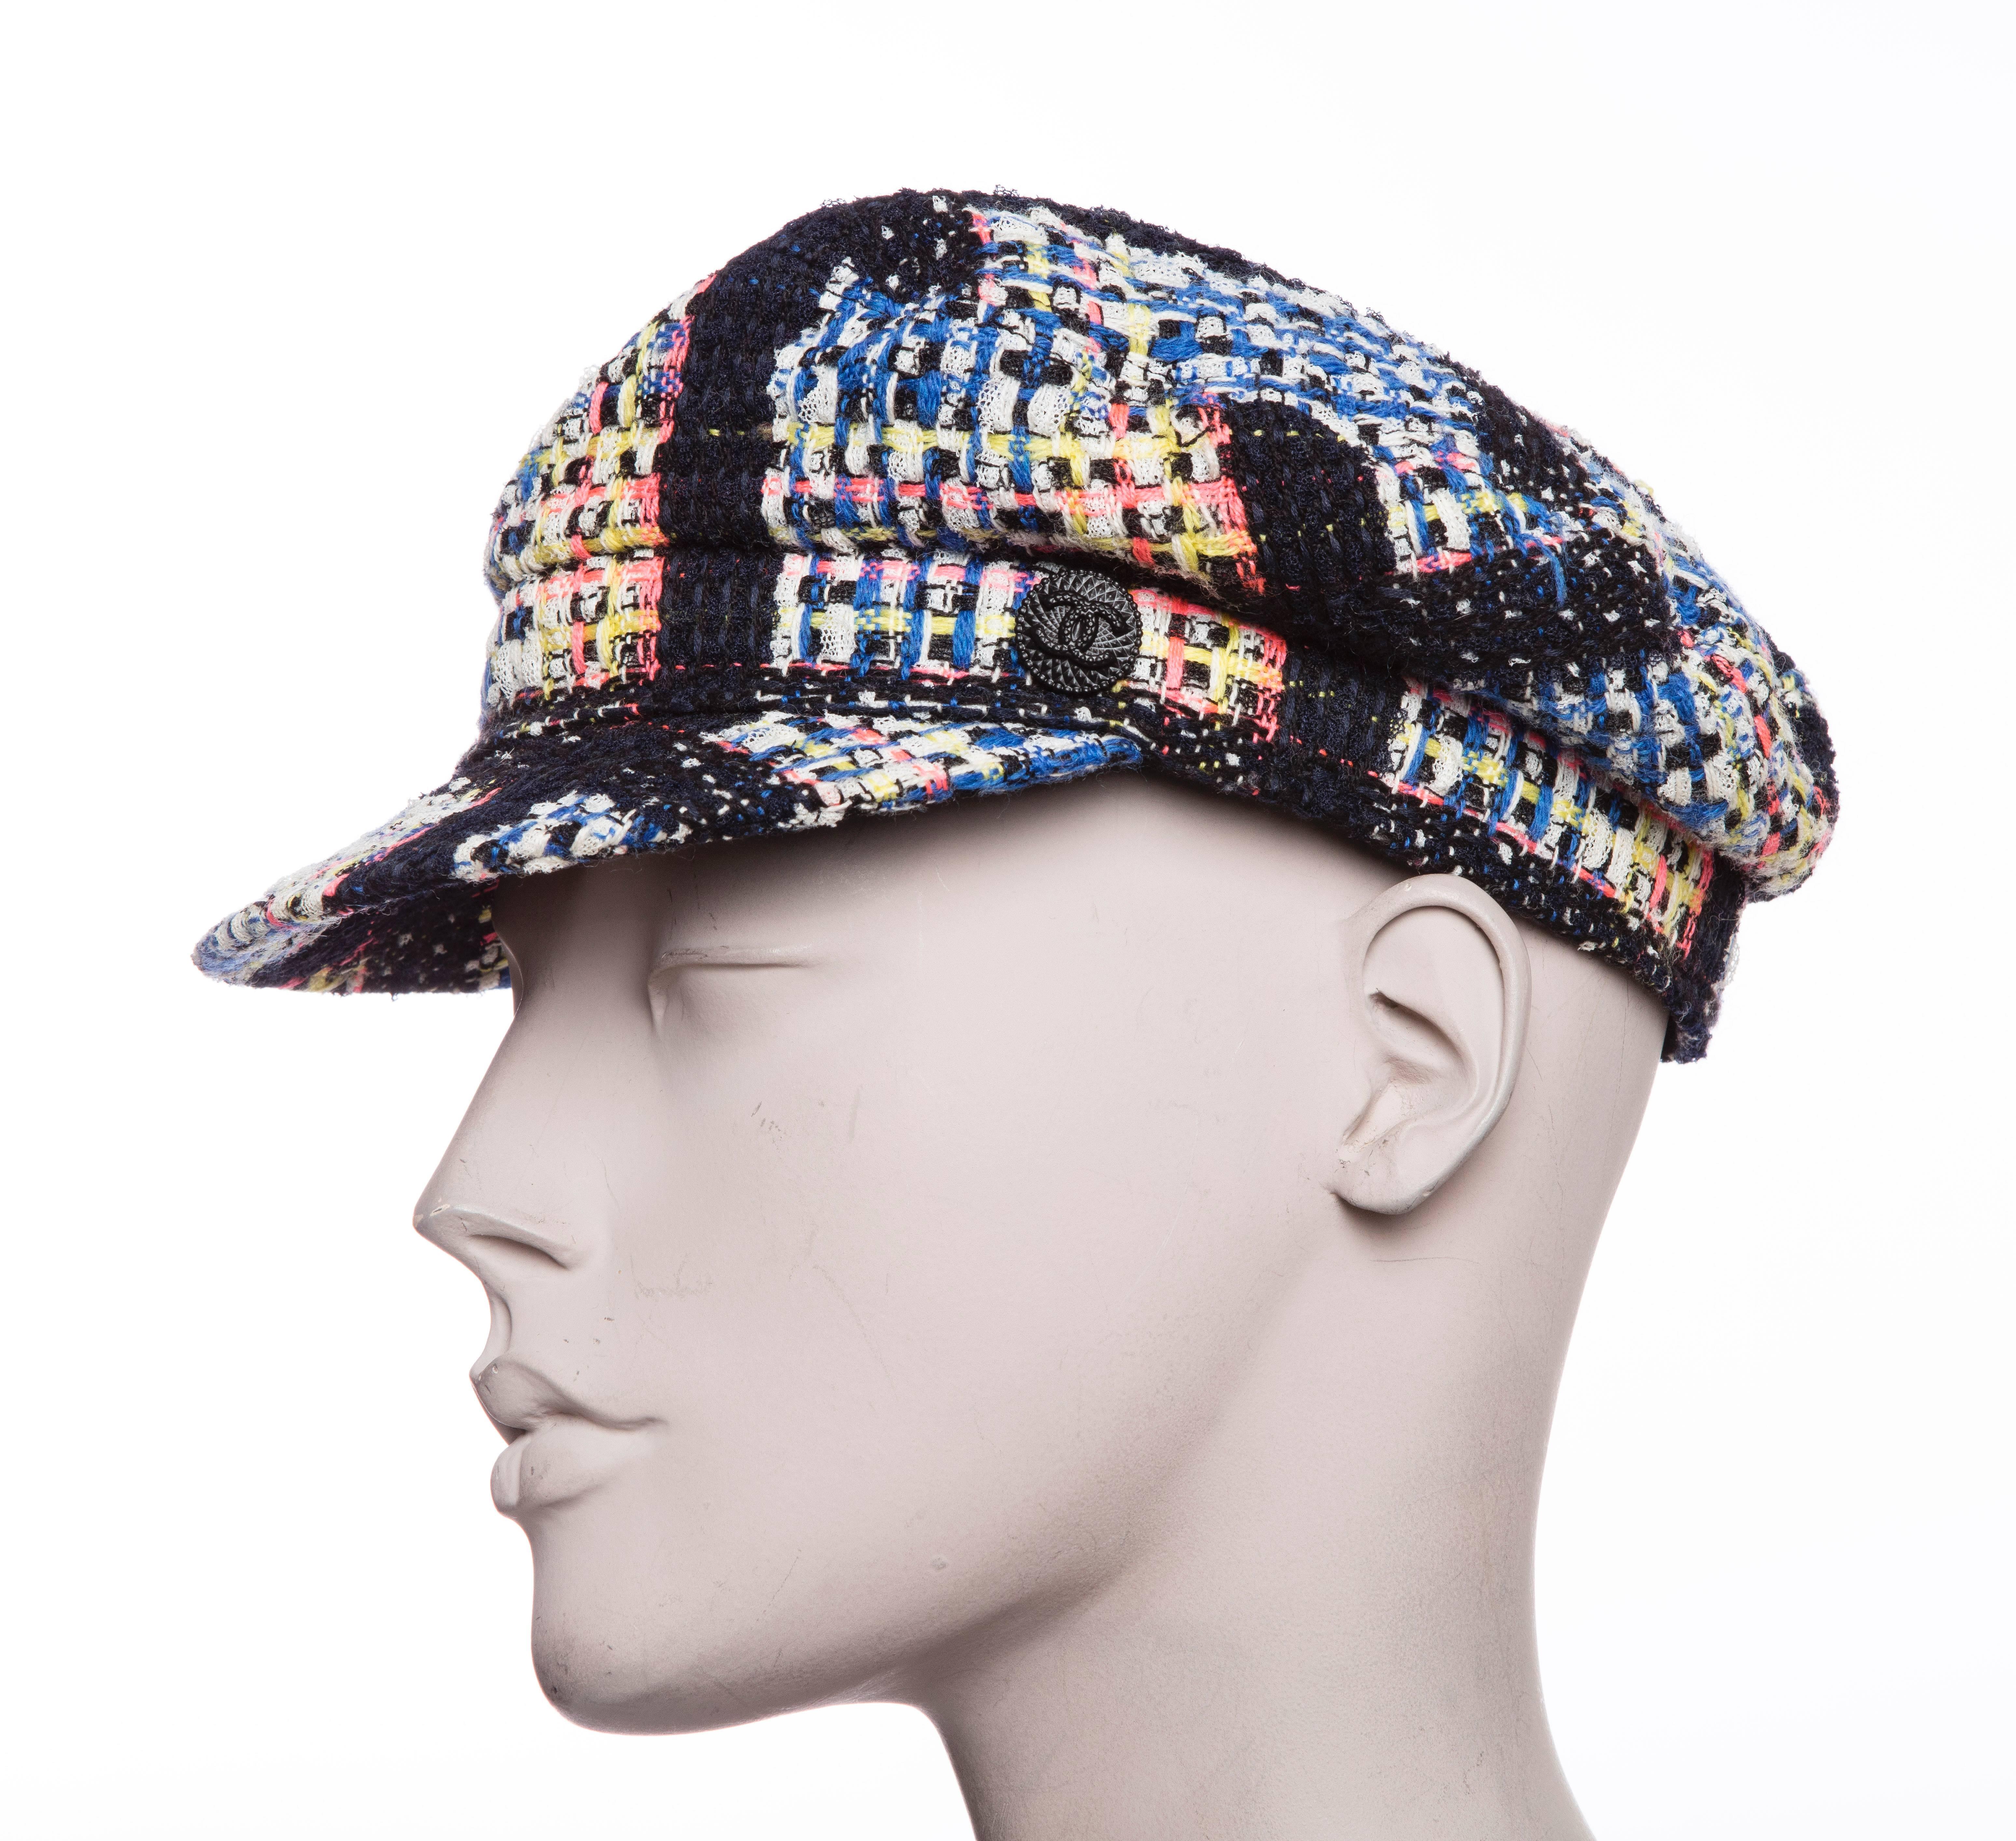 Chanel tweed newsboy cap with CC embellishment at side. 
Designer size 57.

Circumference 23”, Brim 2”
Fabric Content: 59% Wool, 37% Polyamide, 4% Cotton